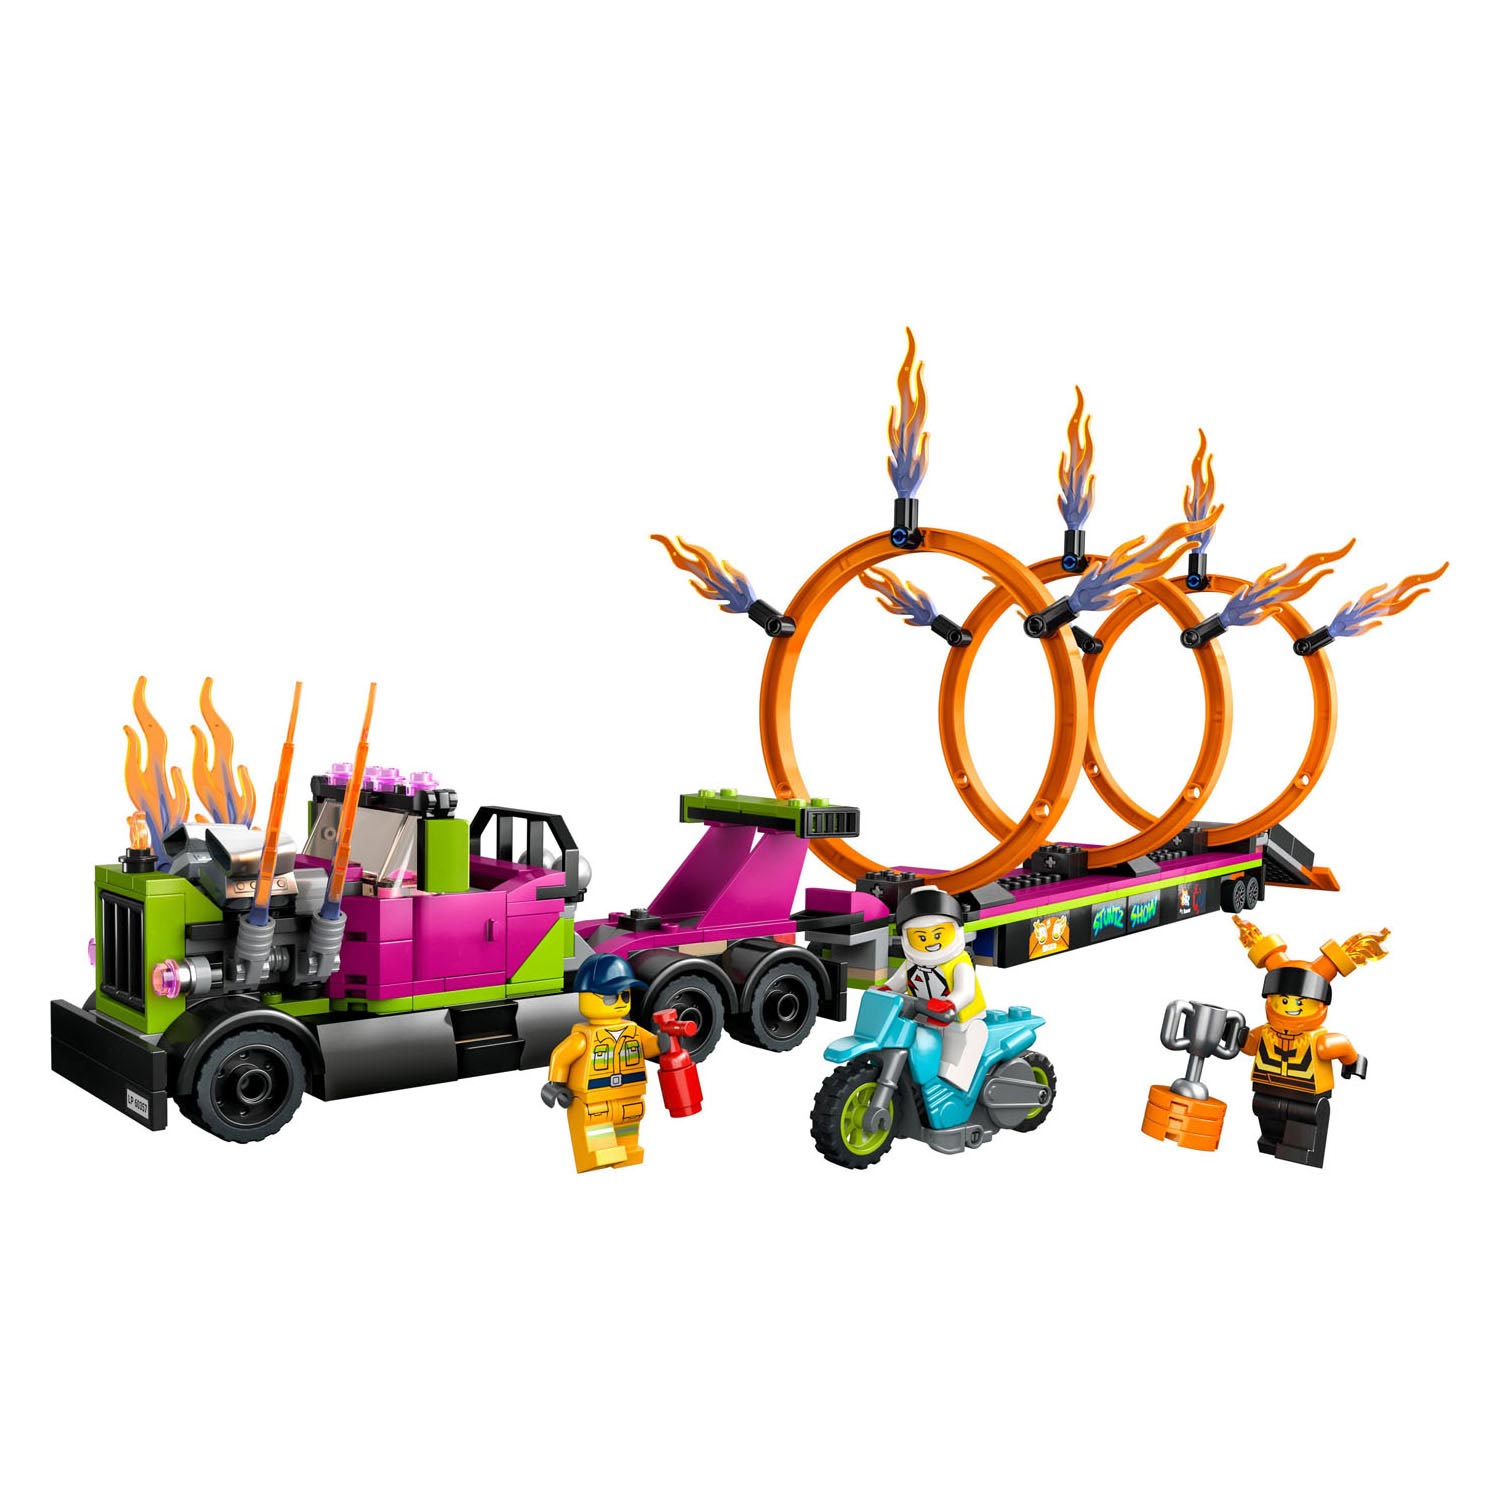 LEGO City 60357 Stunttruck & Ring of Fire-Uitdaging